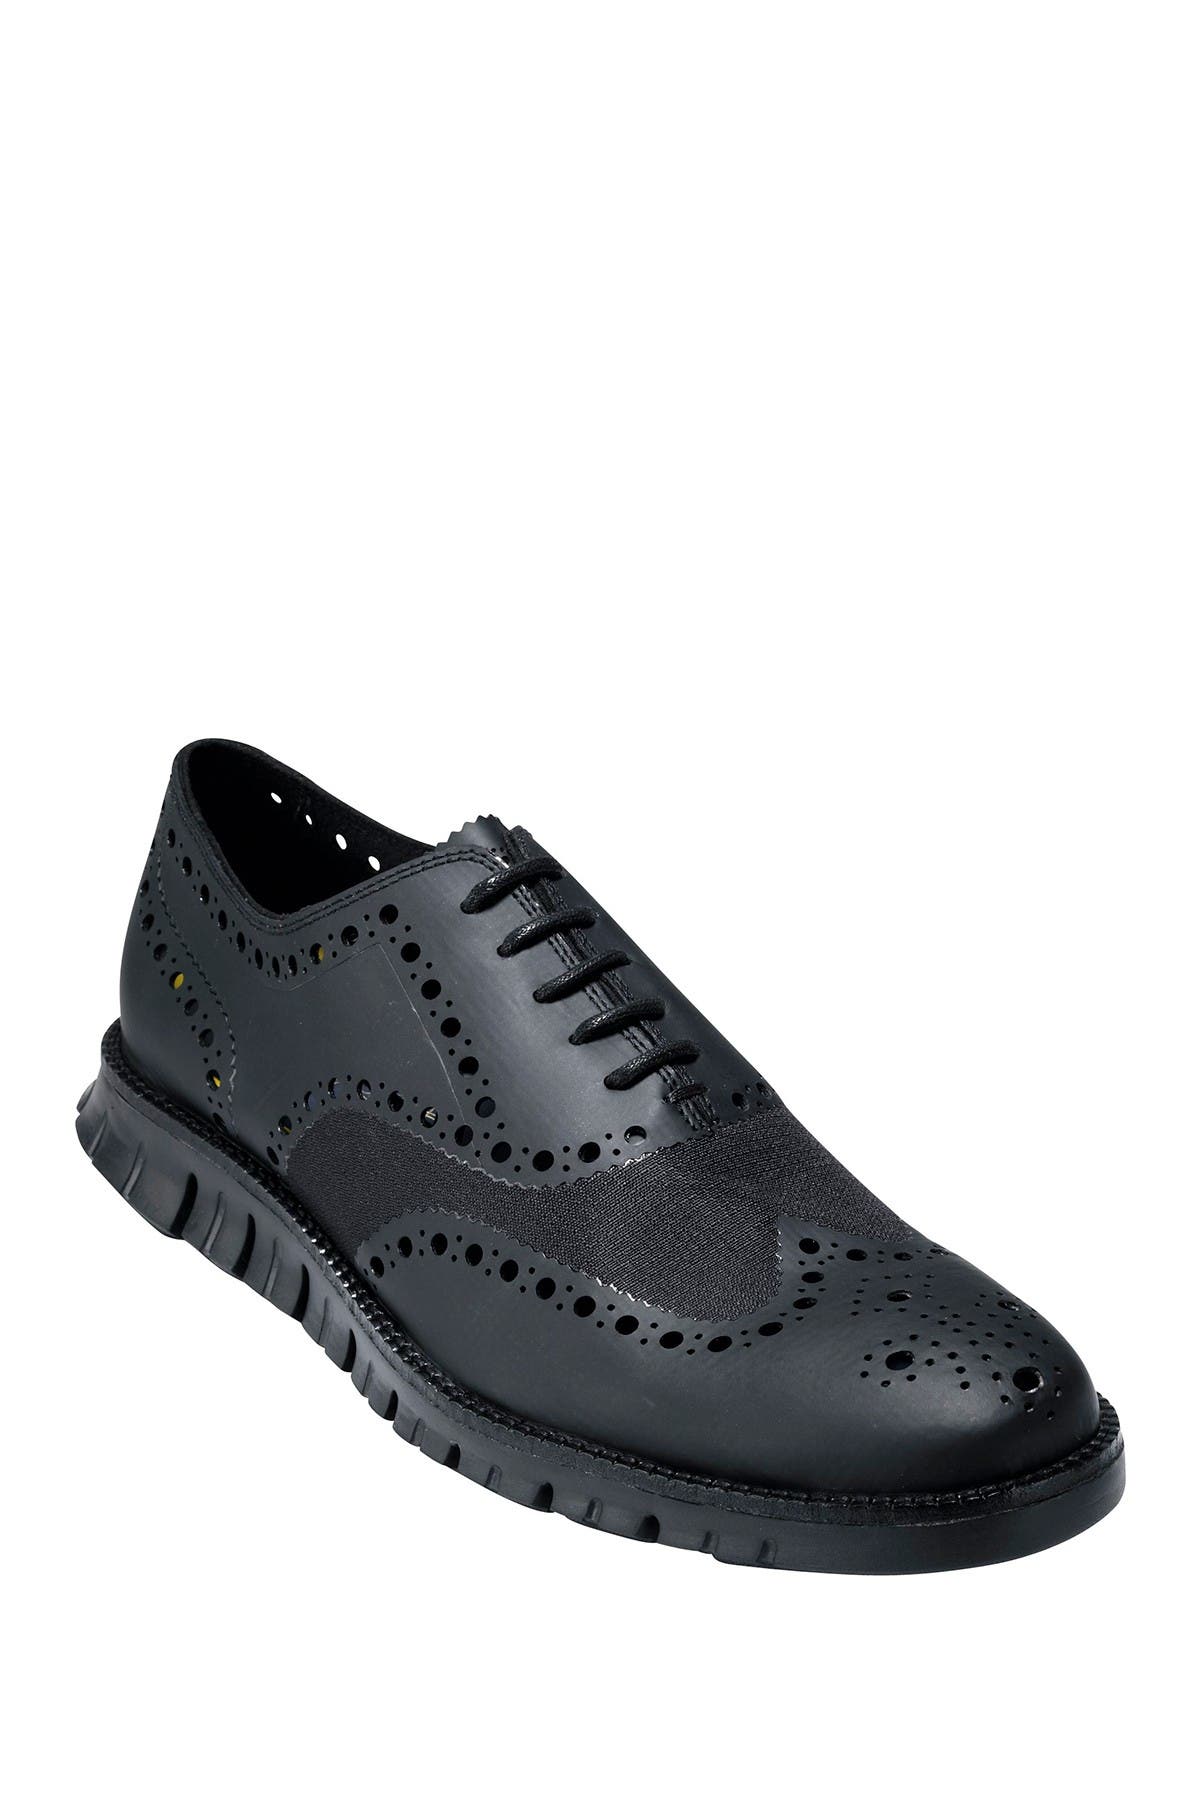 wide cole haan shoes